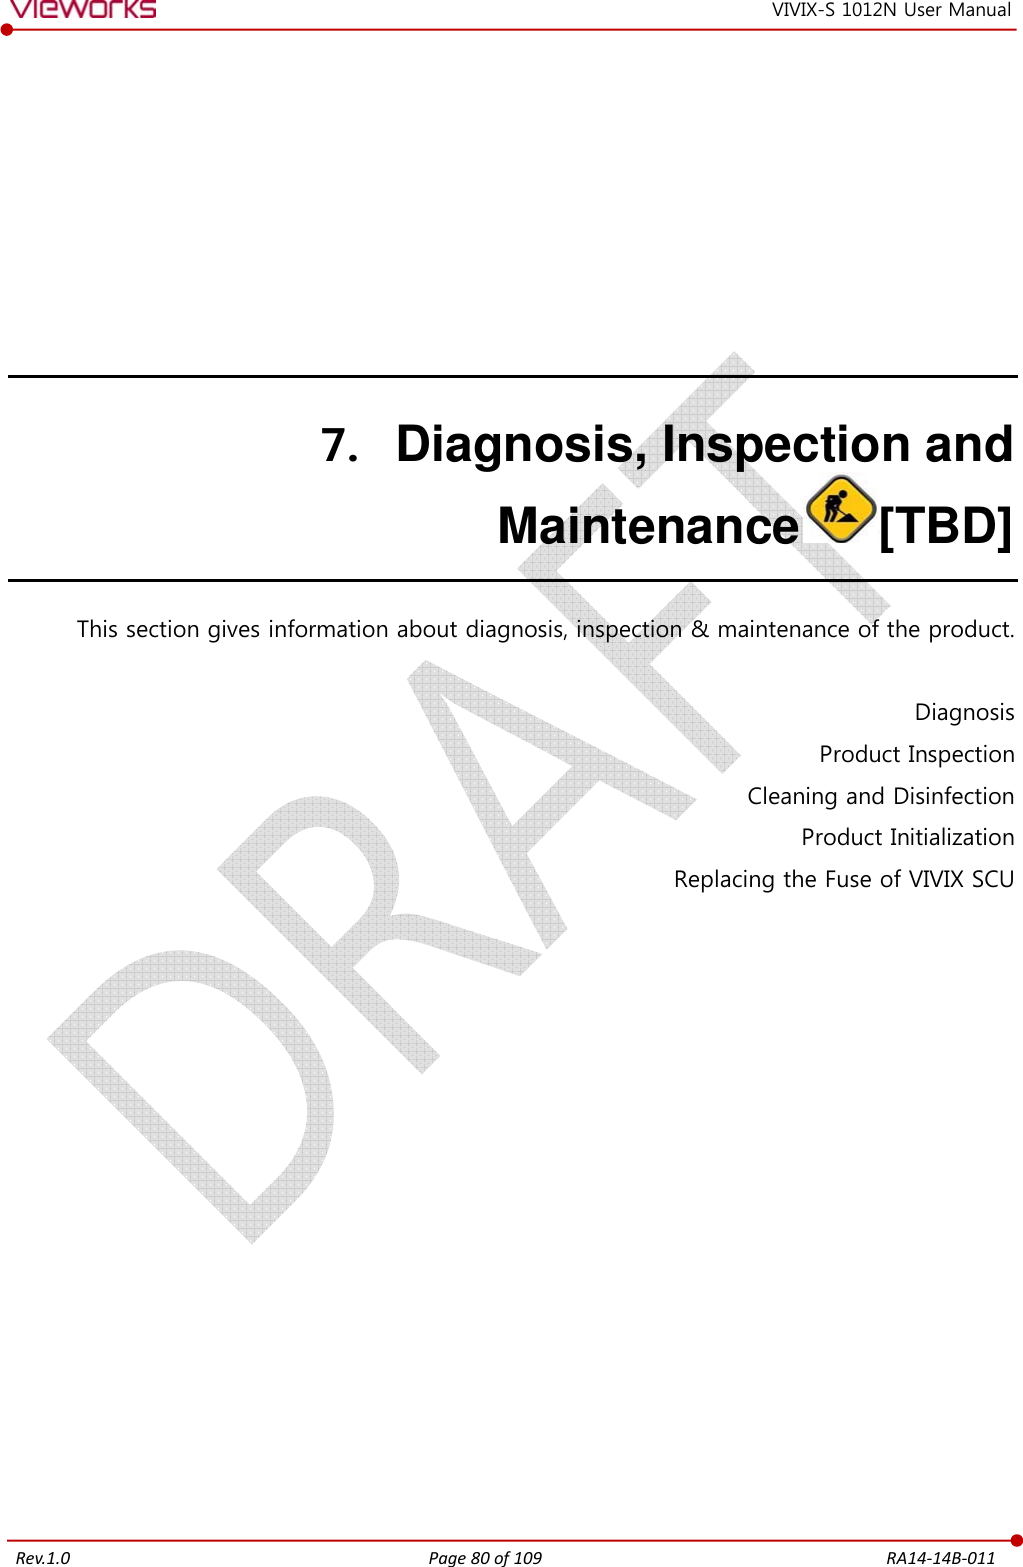   Rev.1.0 Page 80 of 109  RA14-14B-011 VIVIX-S 1012N User Manual 7. Diagnosis, Inspection and Maintenance [TBD] This section gives information about diagnosis, inspection &amp; maintenance of the product.  Diagnosis Product Inspection Cleaning and Disinfection Product Initialization Replacing the Fuse of VIVIX SCU   